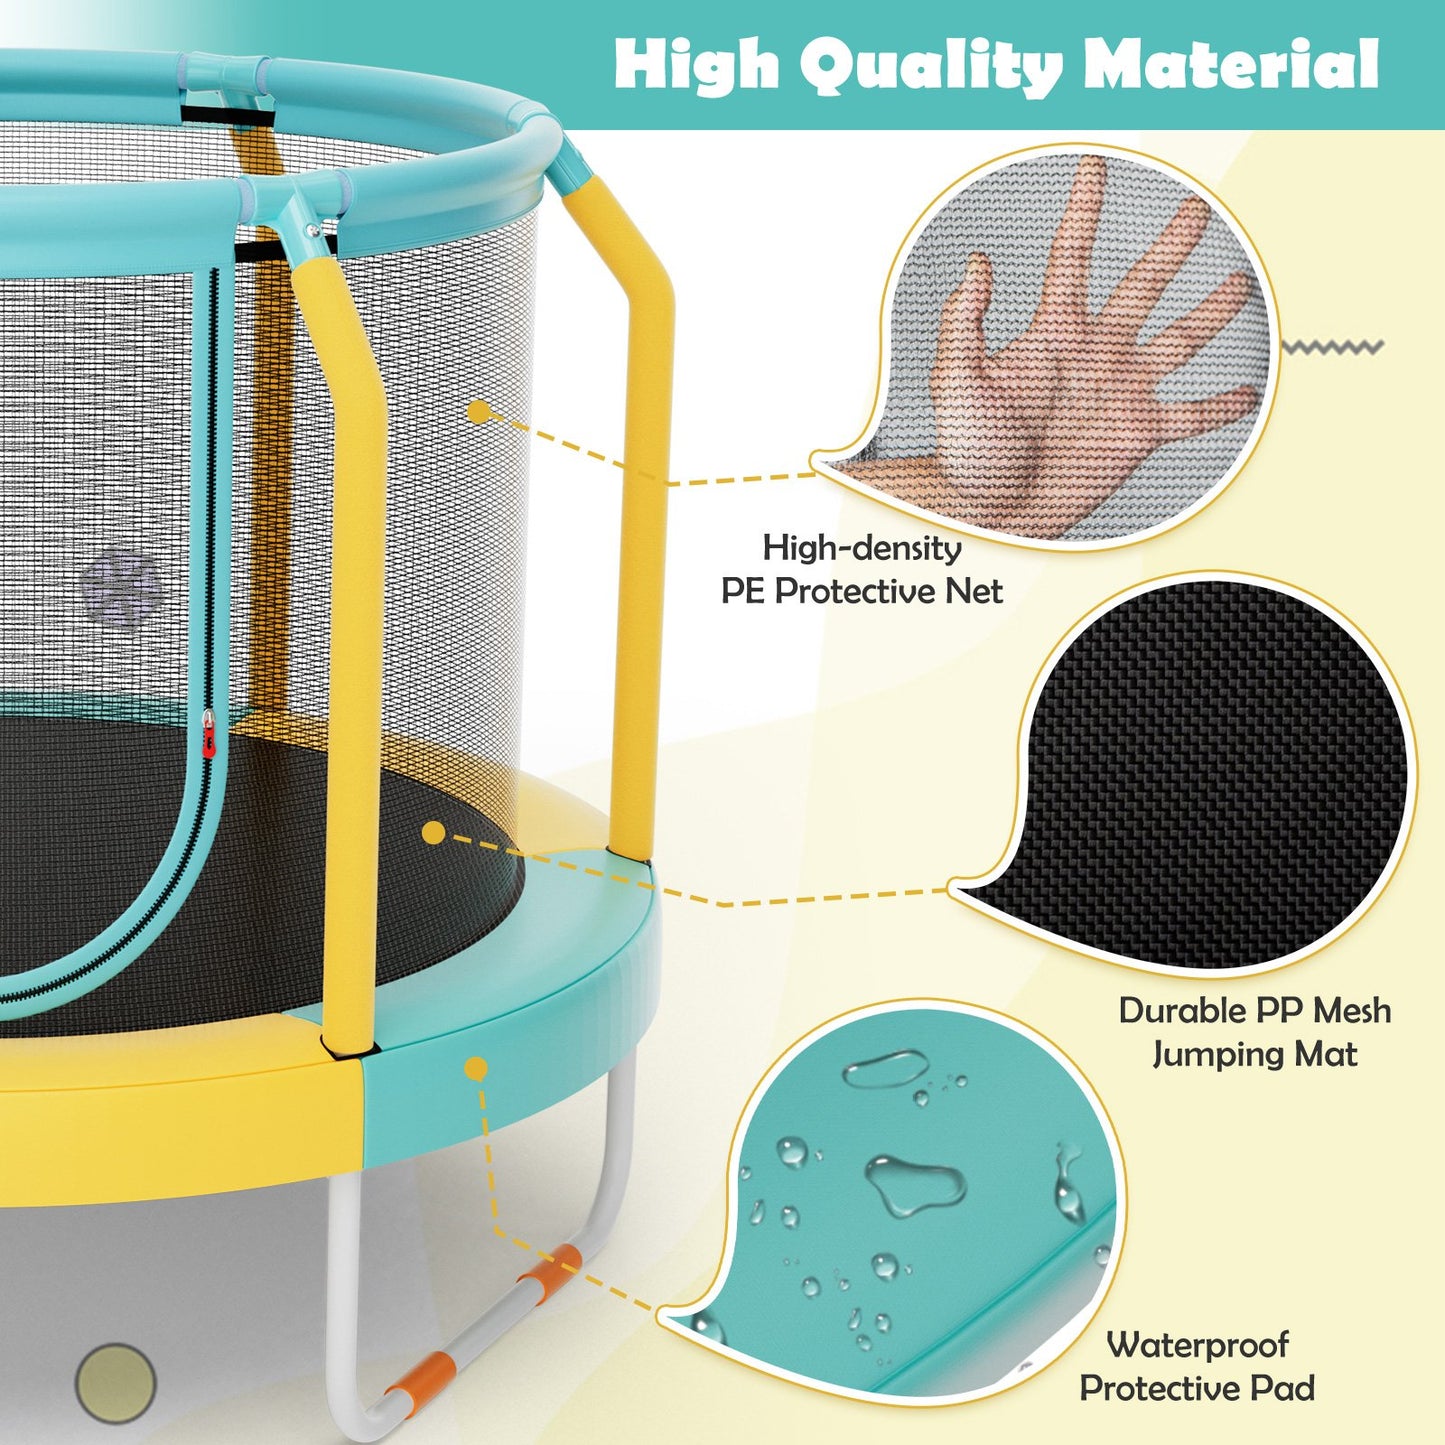 Mini Trampoline with Enclosure and Heavy-duty Metal Frame, Yellow